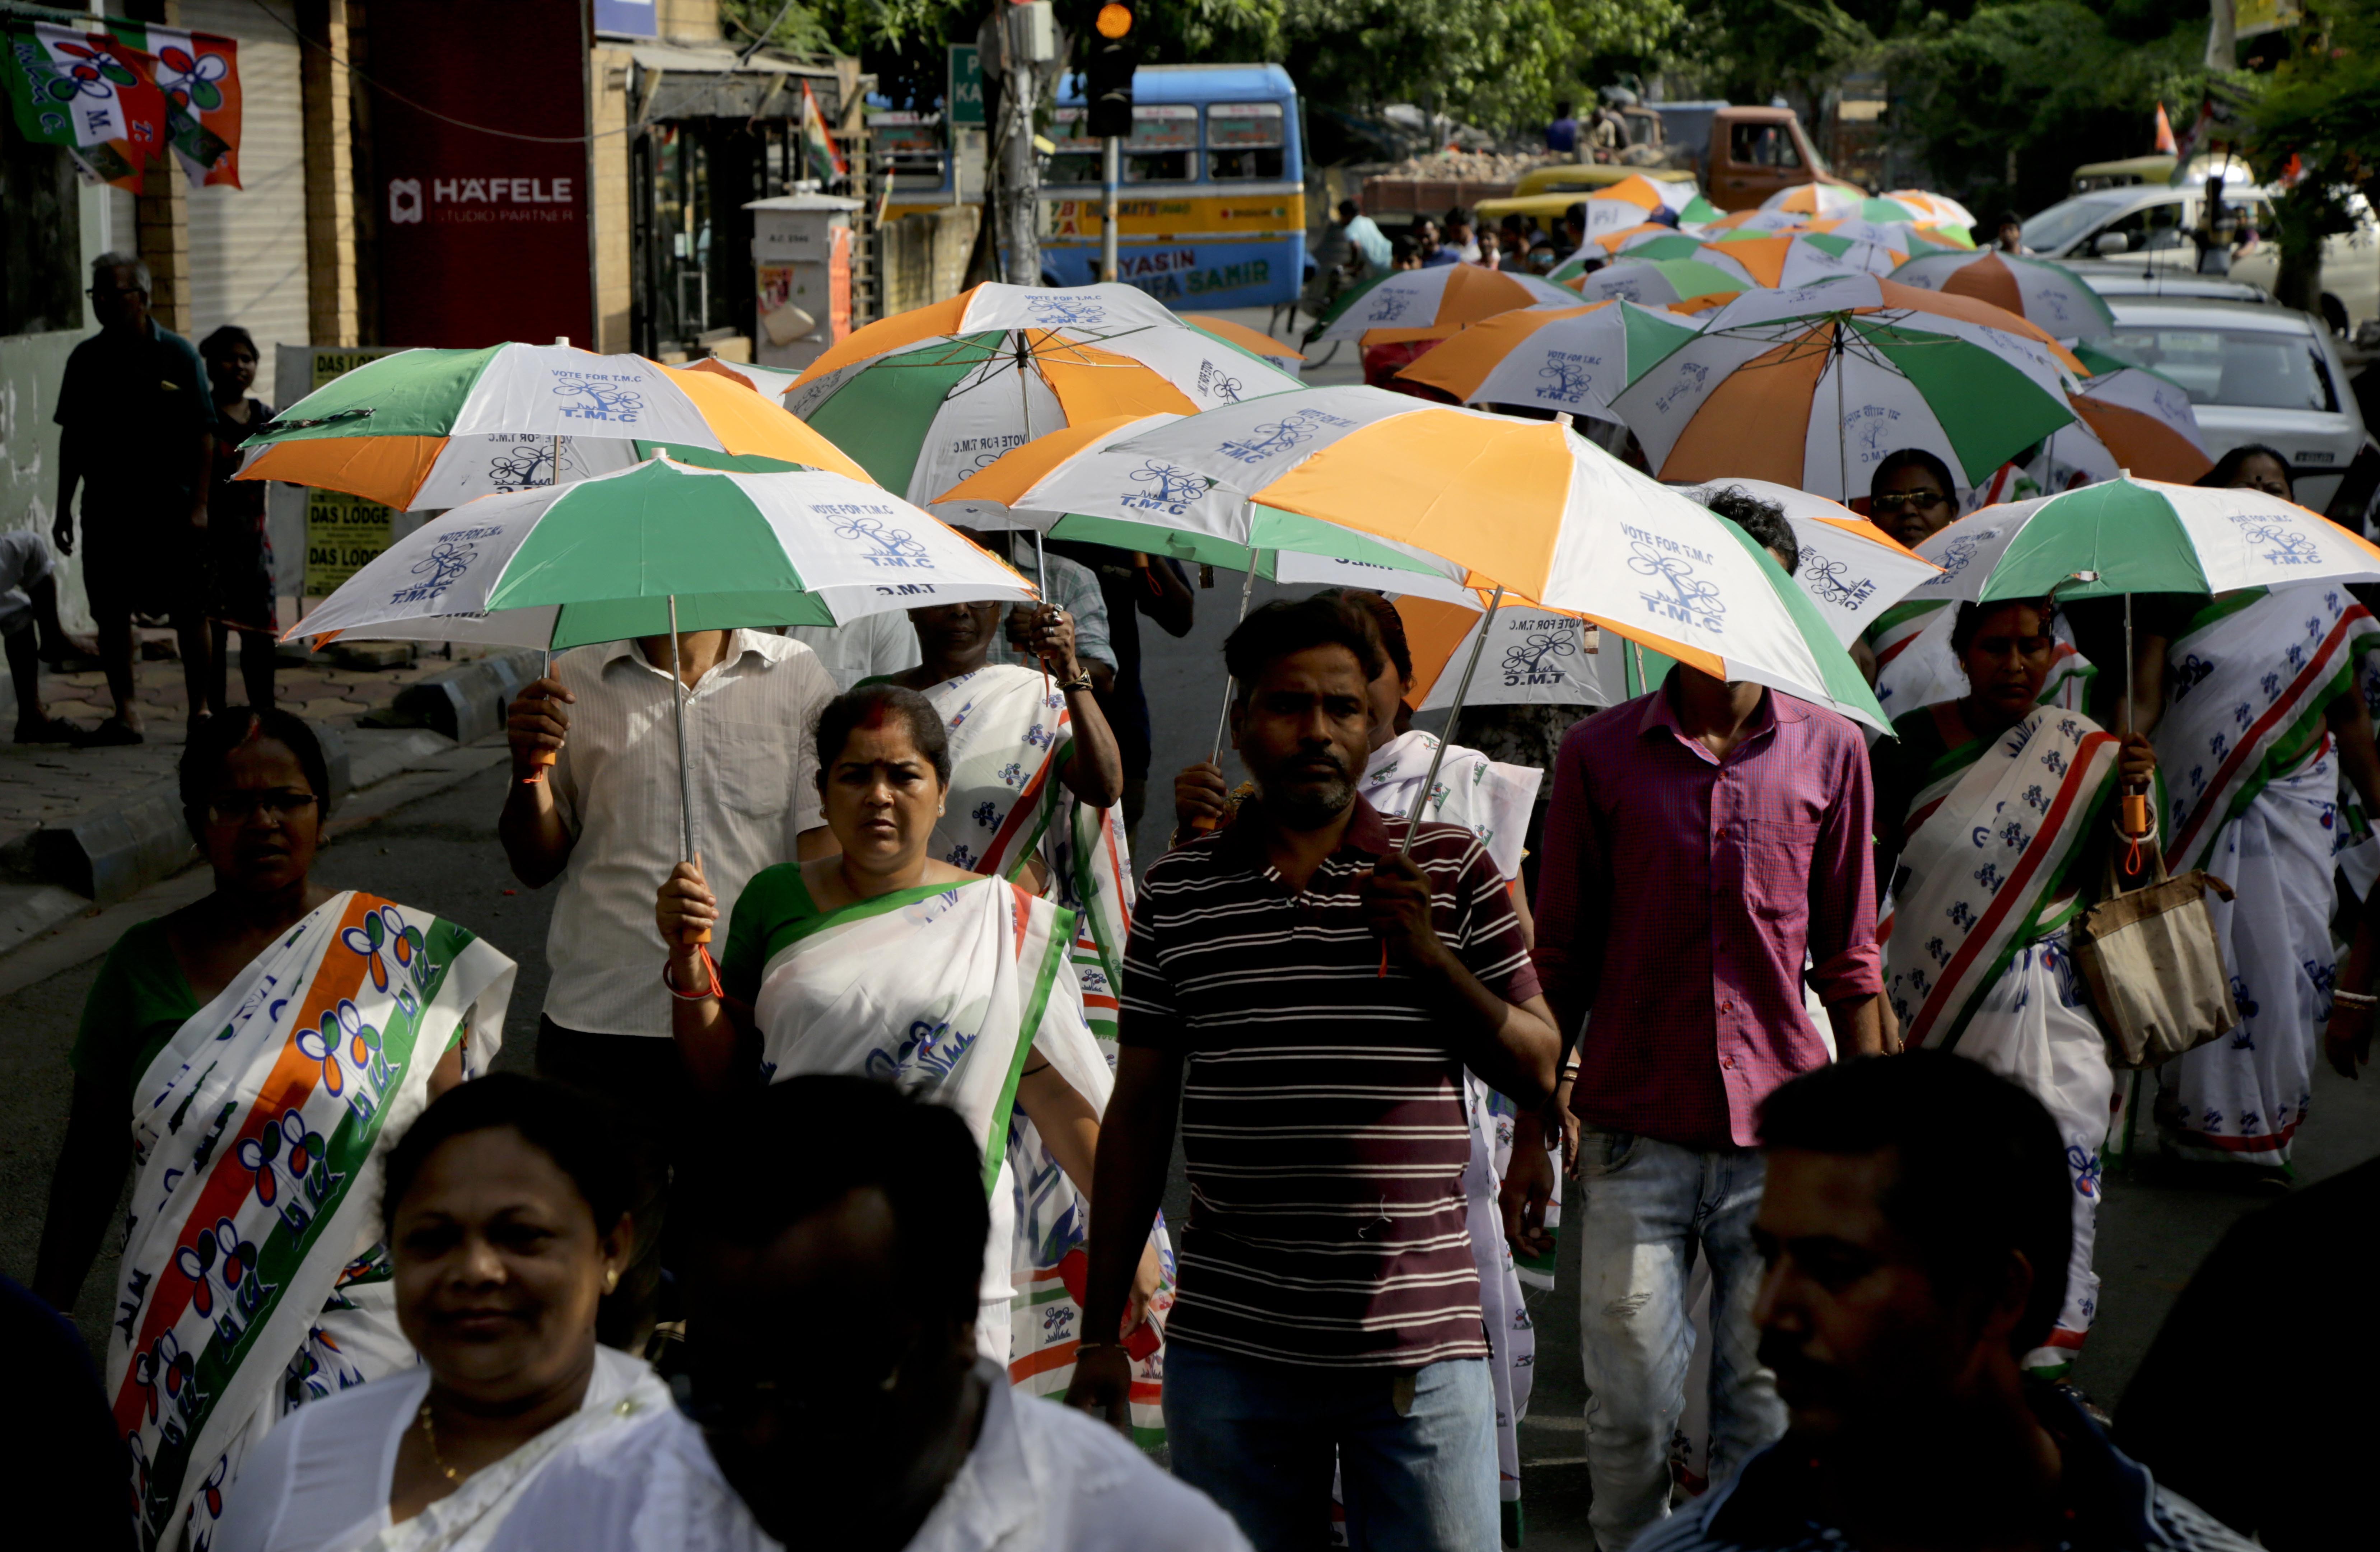 Supporters of Trinamool Congress party holding umbrellas with party symbol walk in an election campaign rally in Kolkata | AP